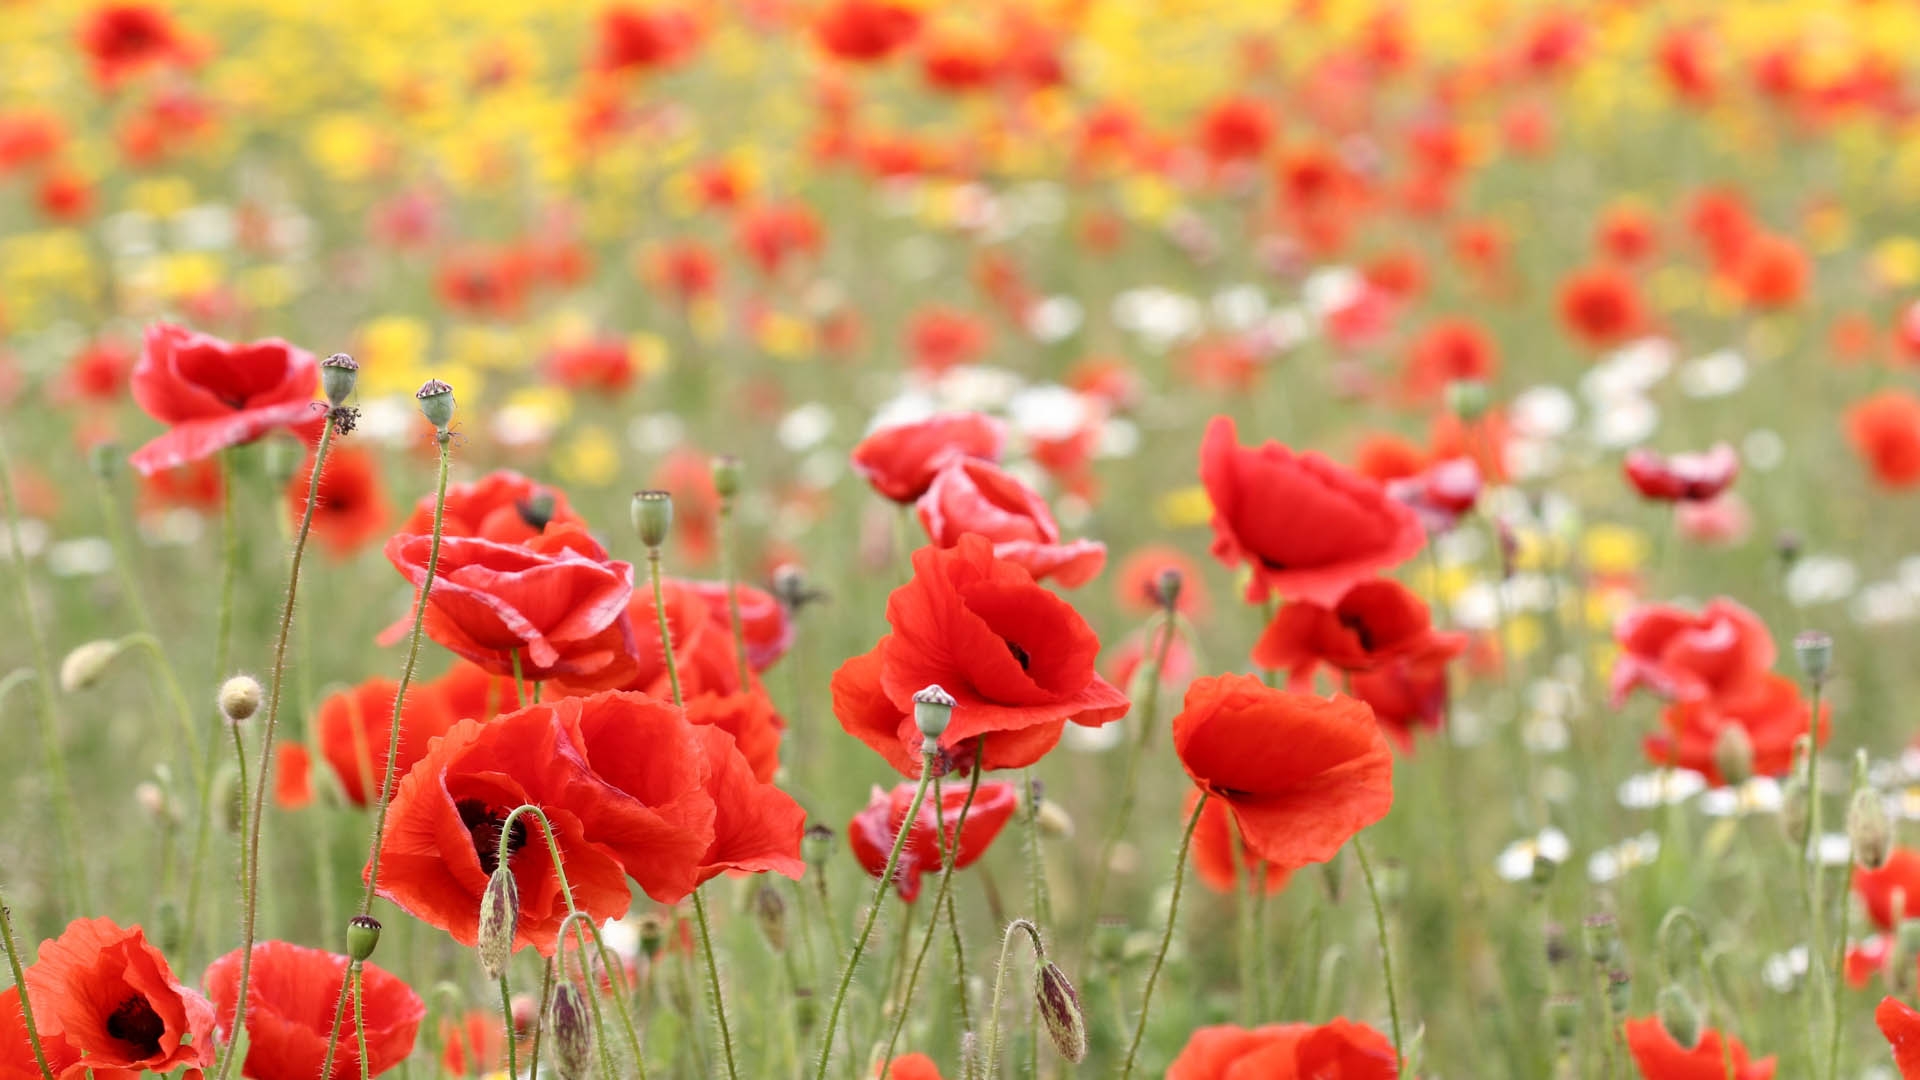 2560x1080 Poppies Field Flowers 2560x1080 Resolution Wallpaper Hd Flowers 4k Wallpapers Images Photos And Background Wallpapers Den